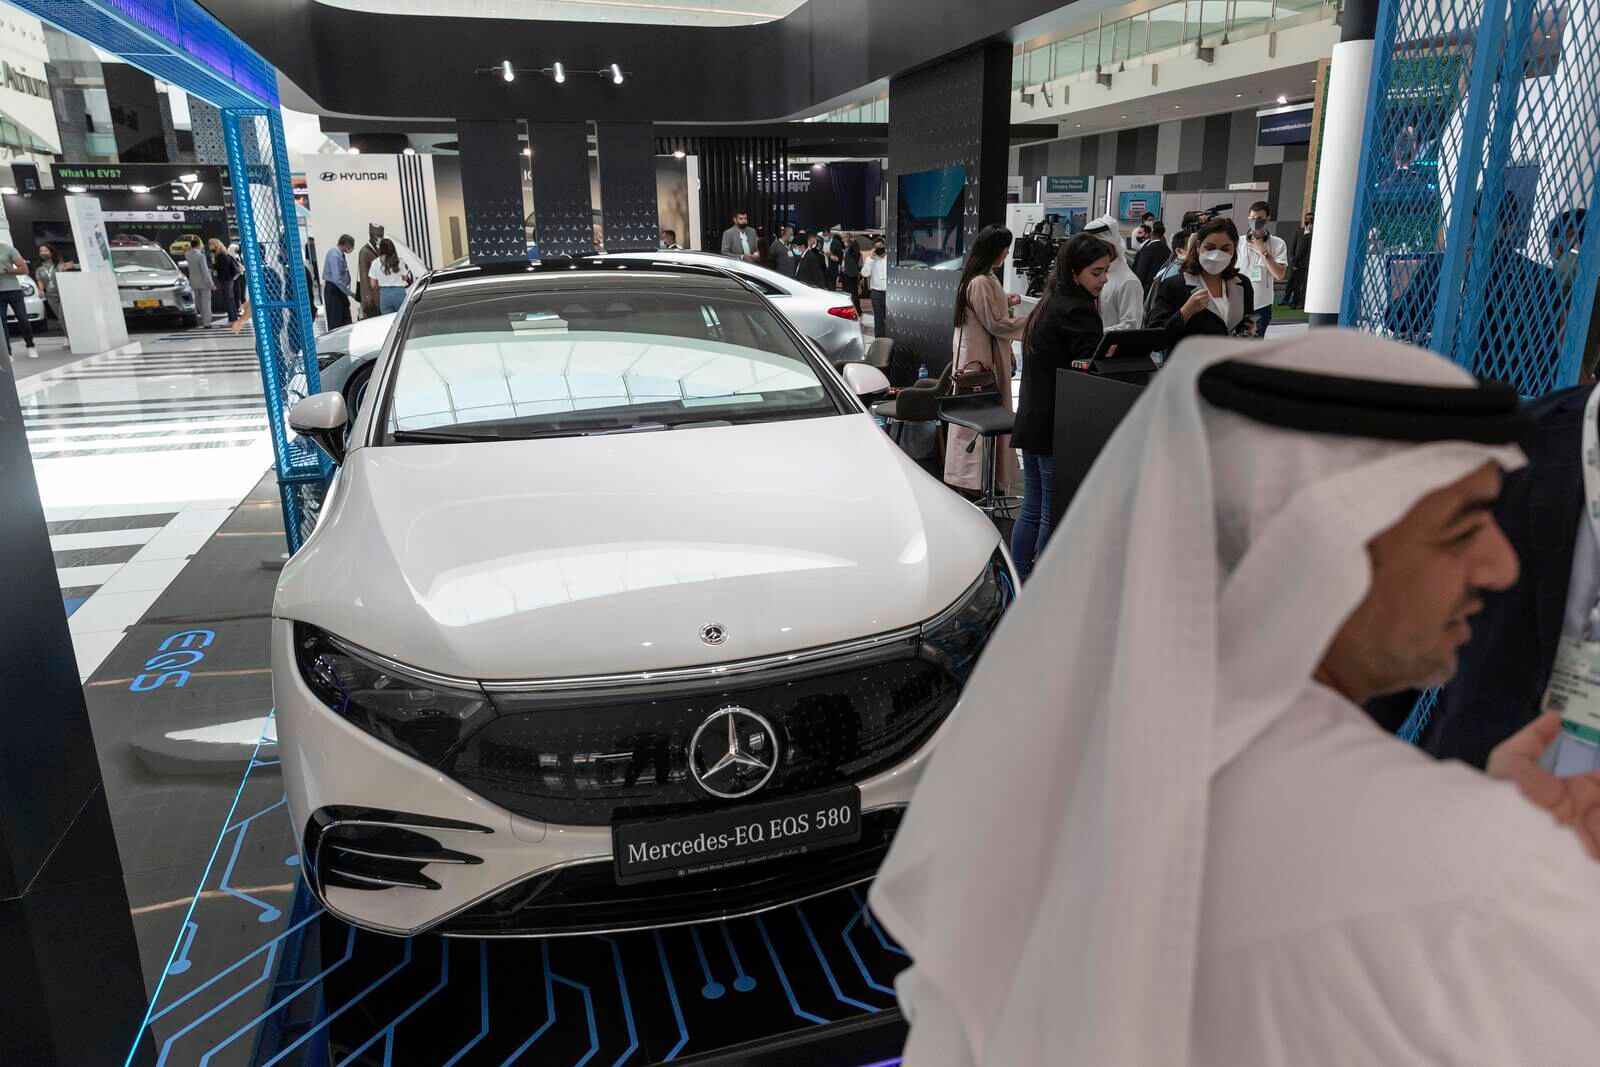 Abu Dhabi outlines policy for electric vehicle charging infrastructure